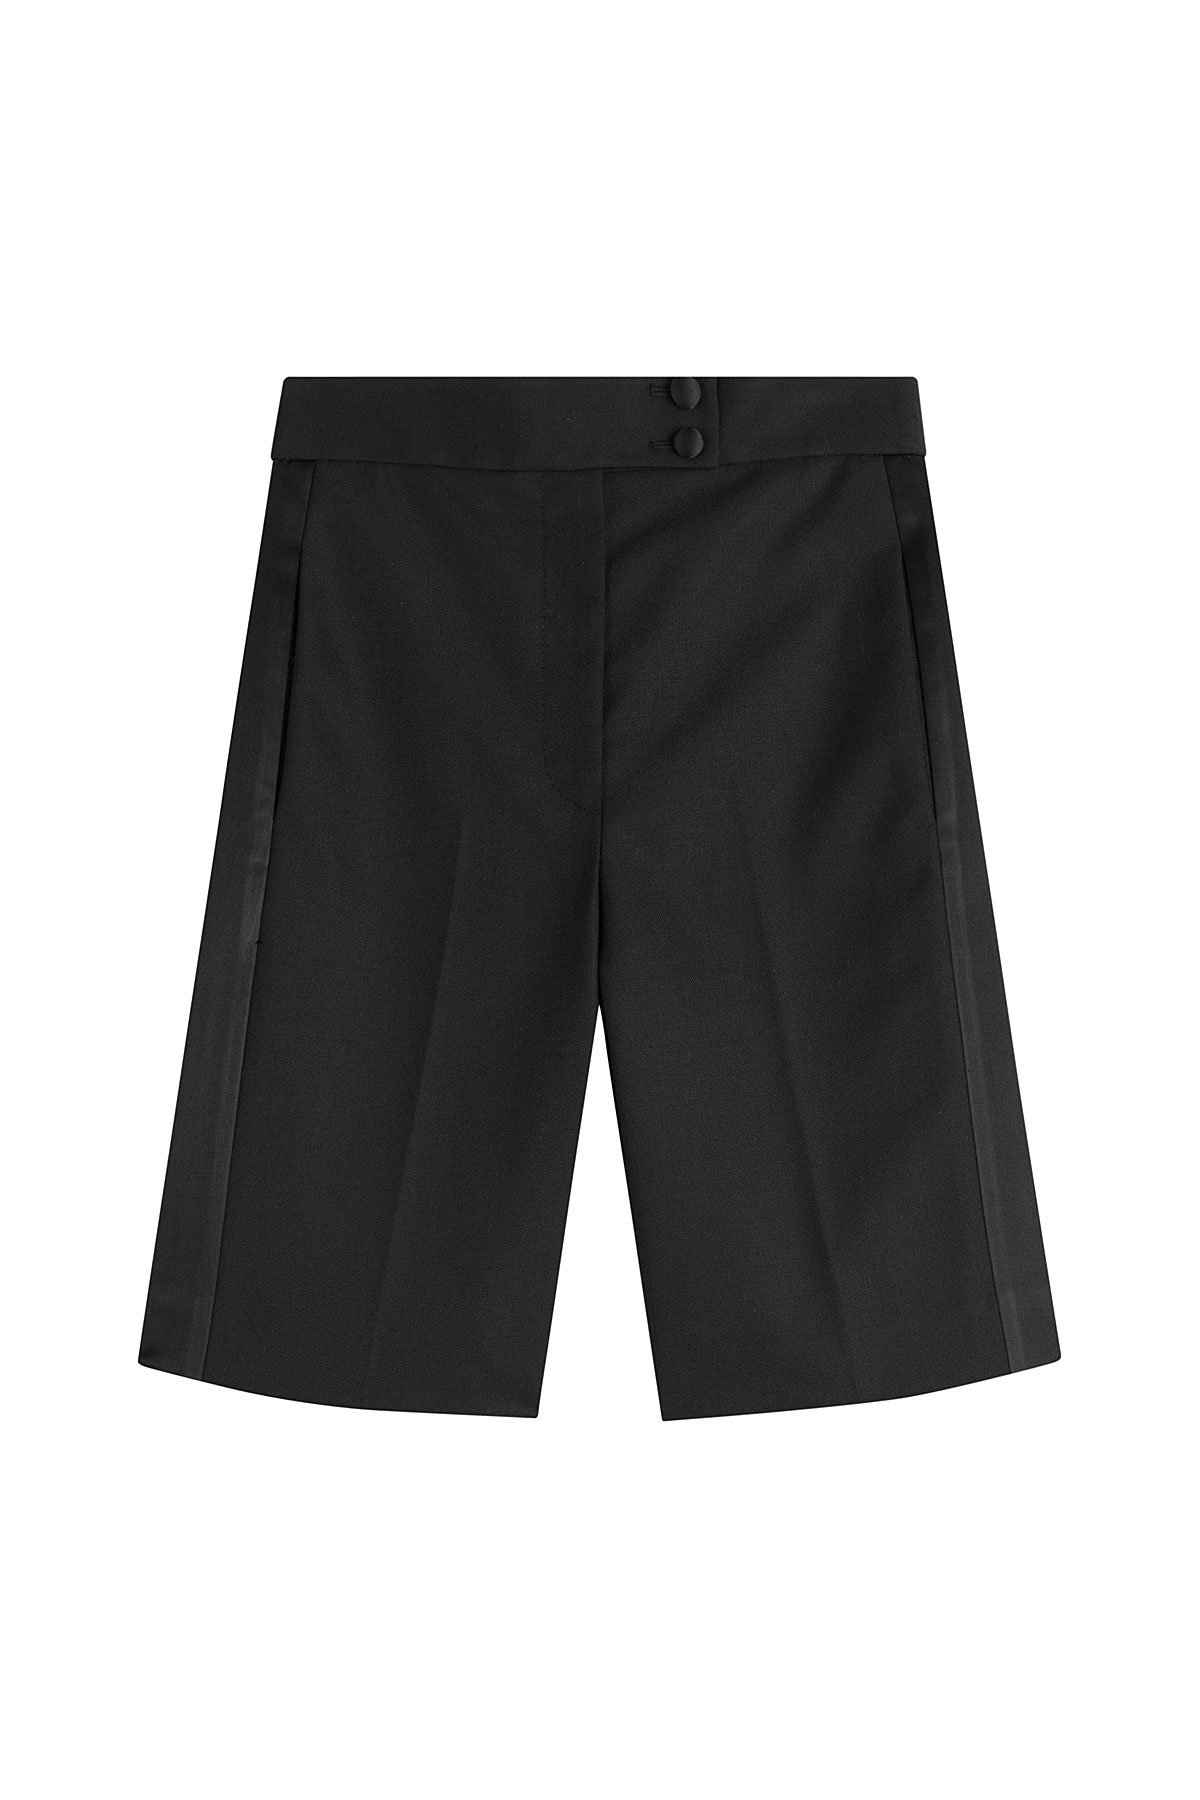 Marc Jacobs - Wool-Blend Tailored Tuxedo Shorts